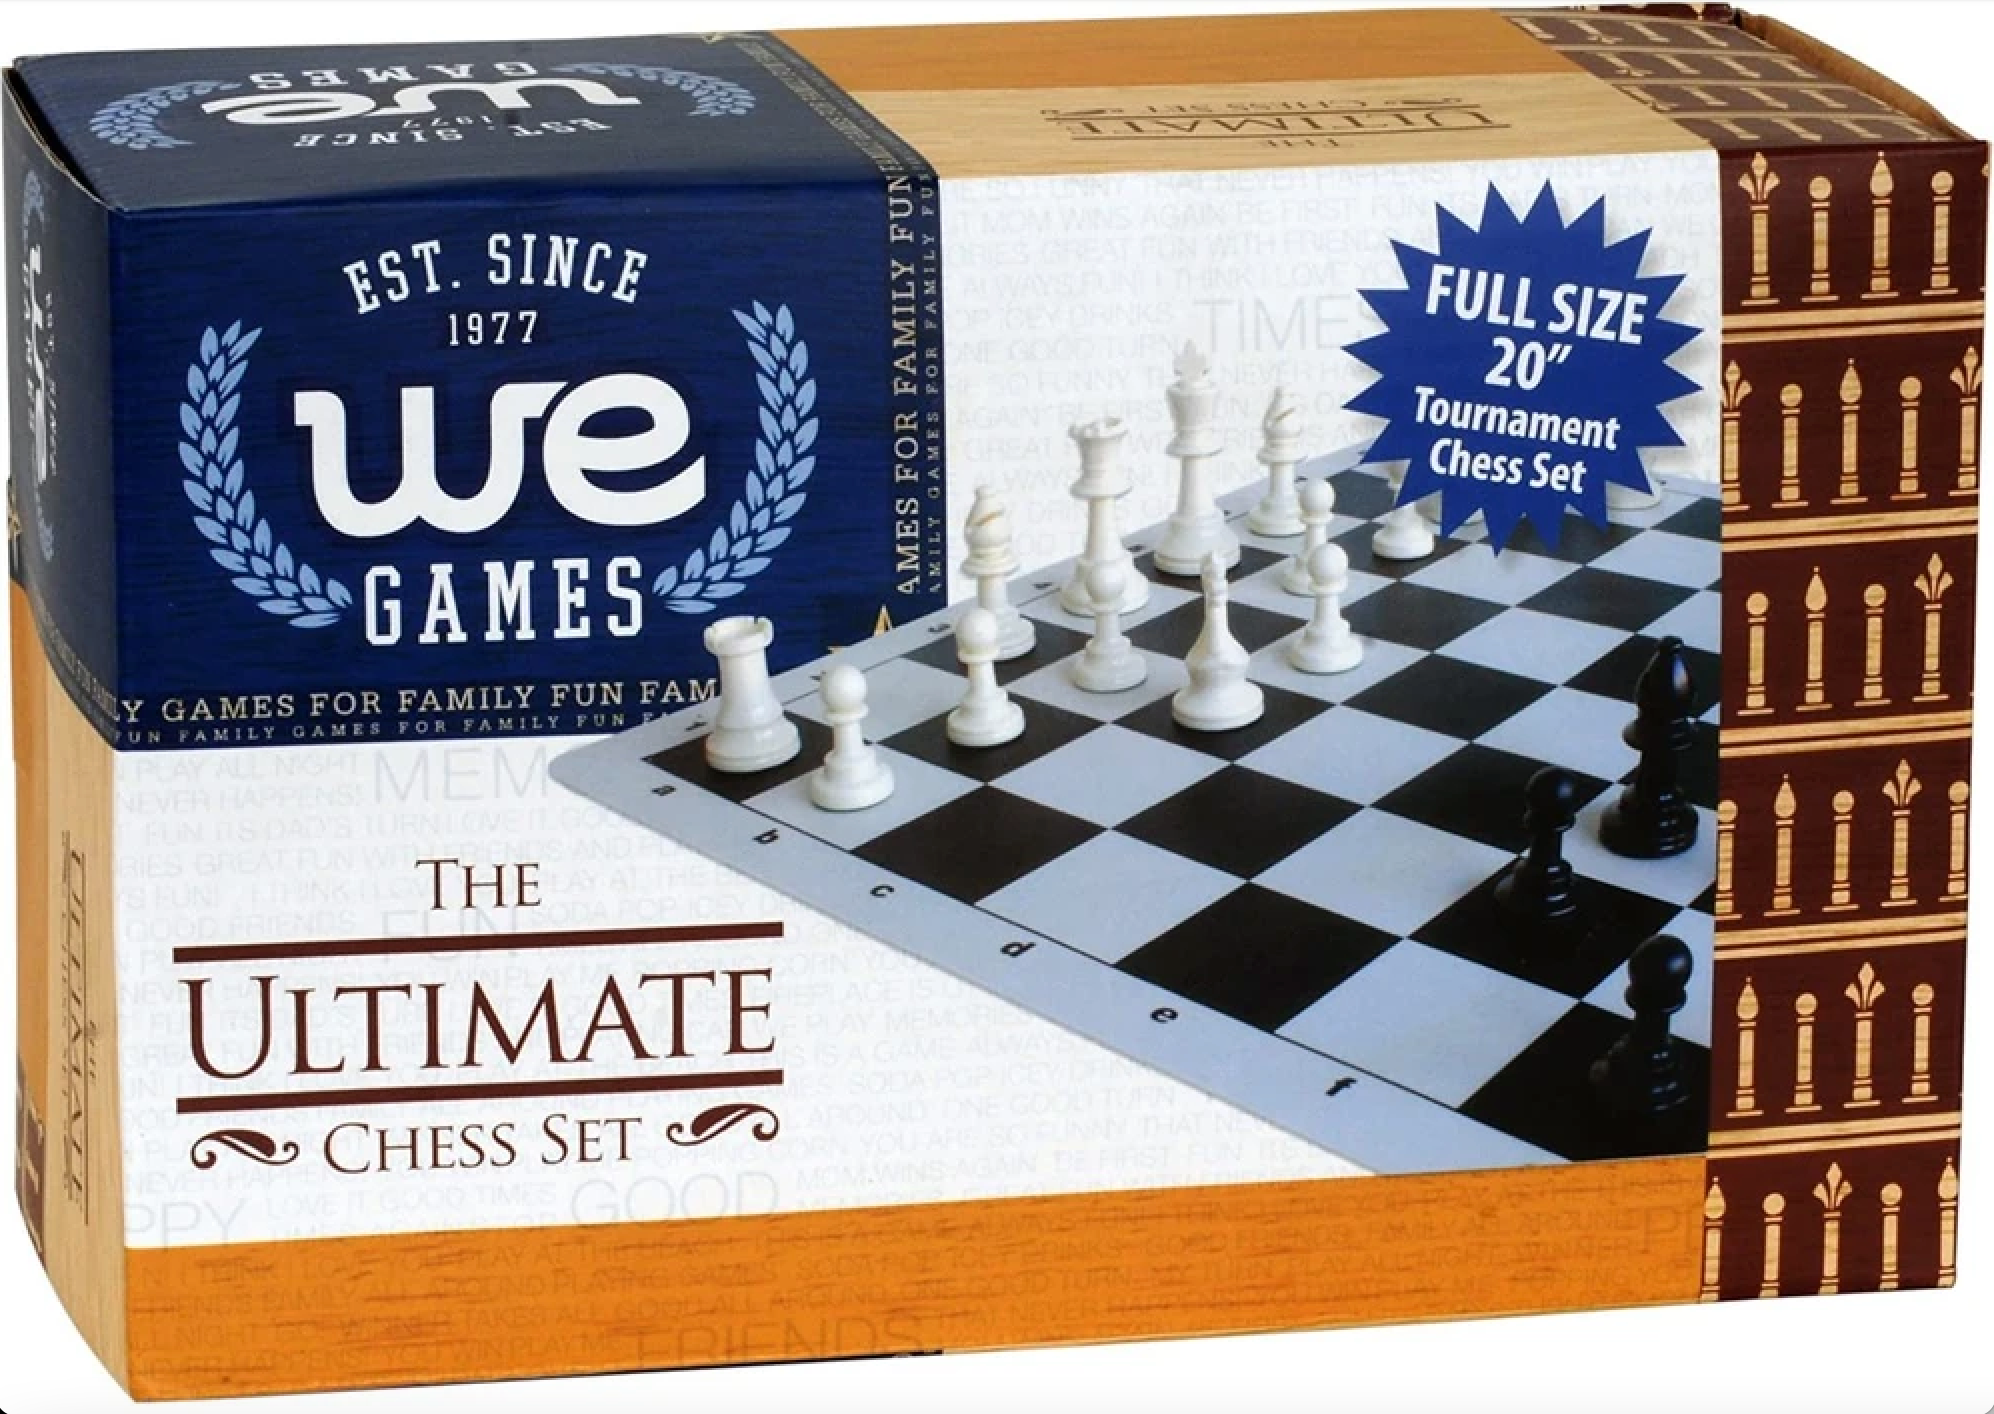 The Ultimate Chess Set